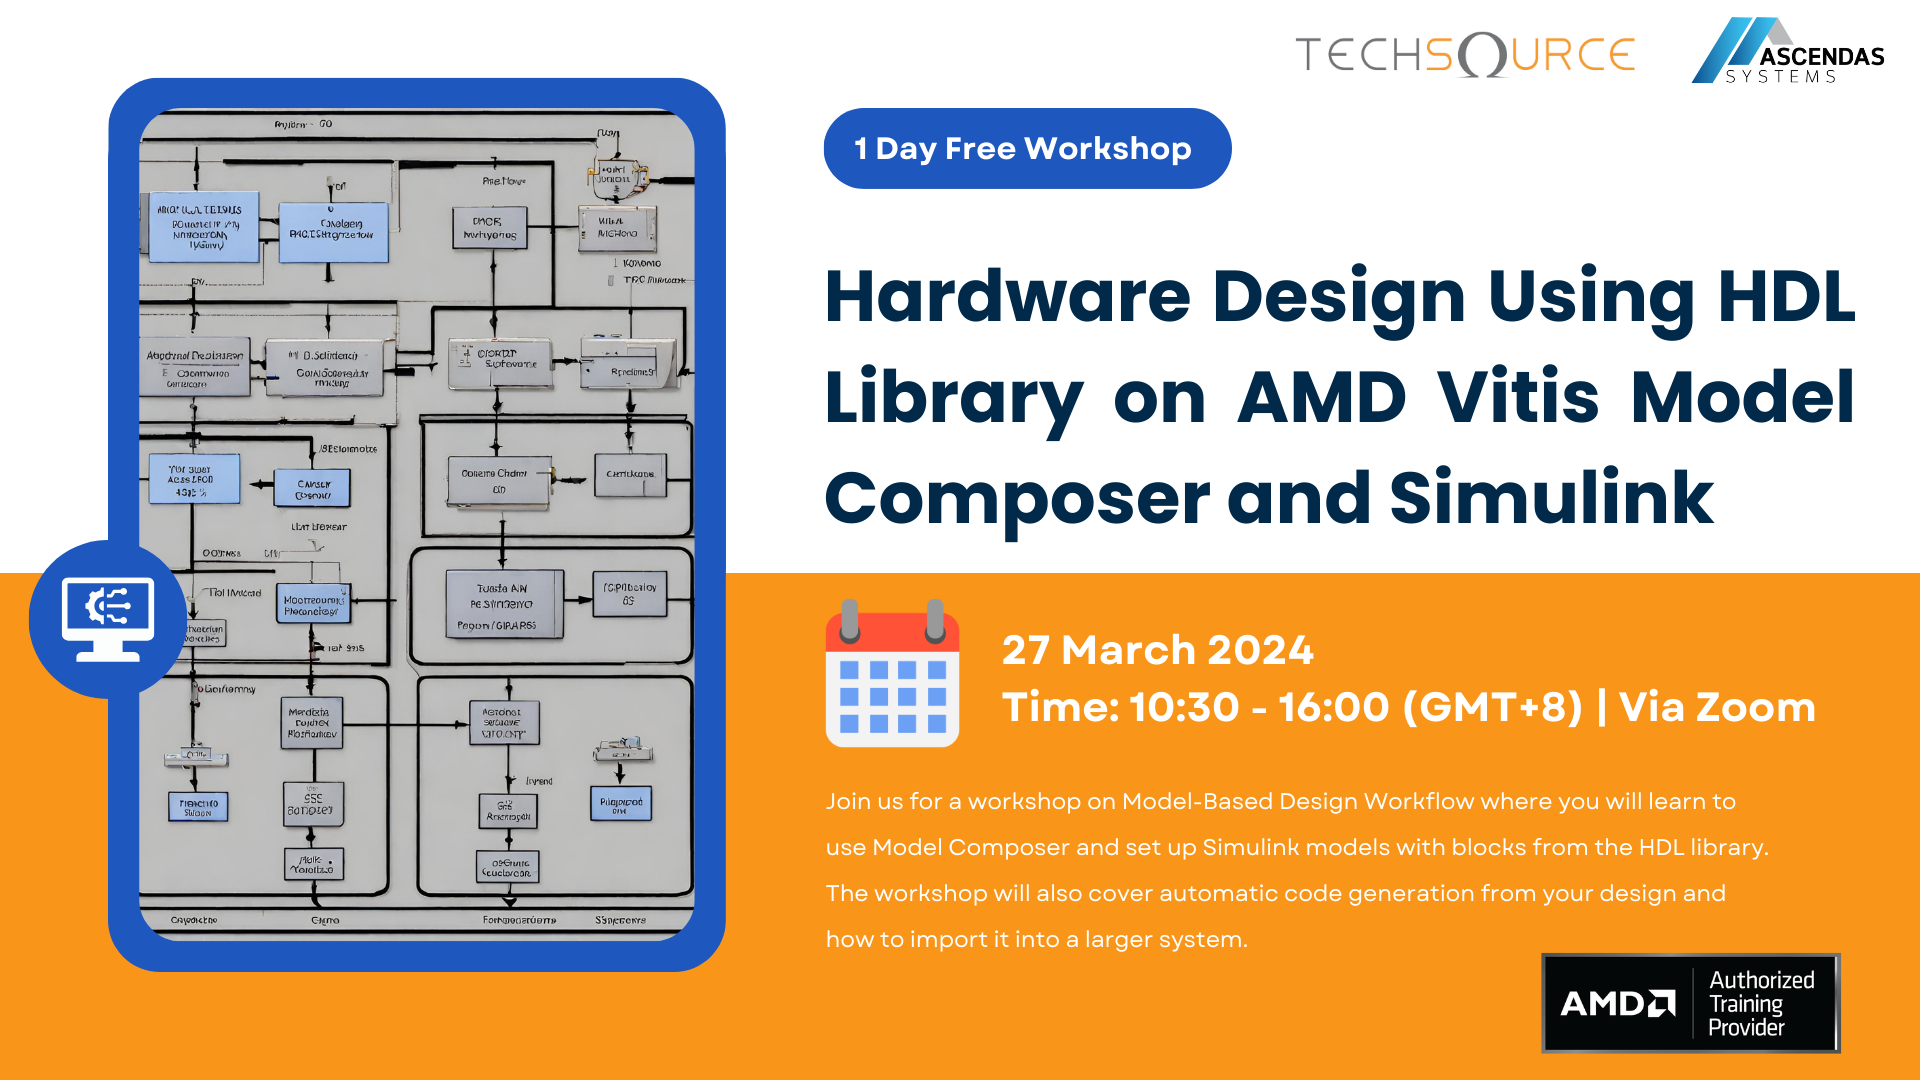 Hardware Design Using HDL Library on AMD Vitis Model Composer and Simulink